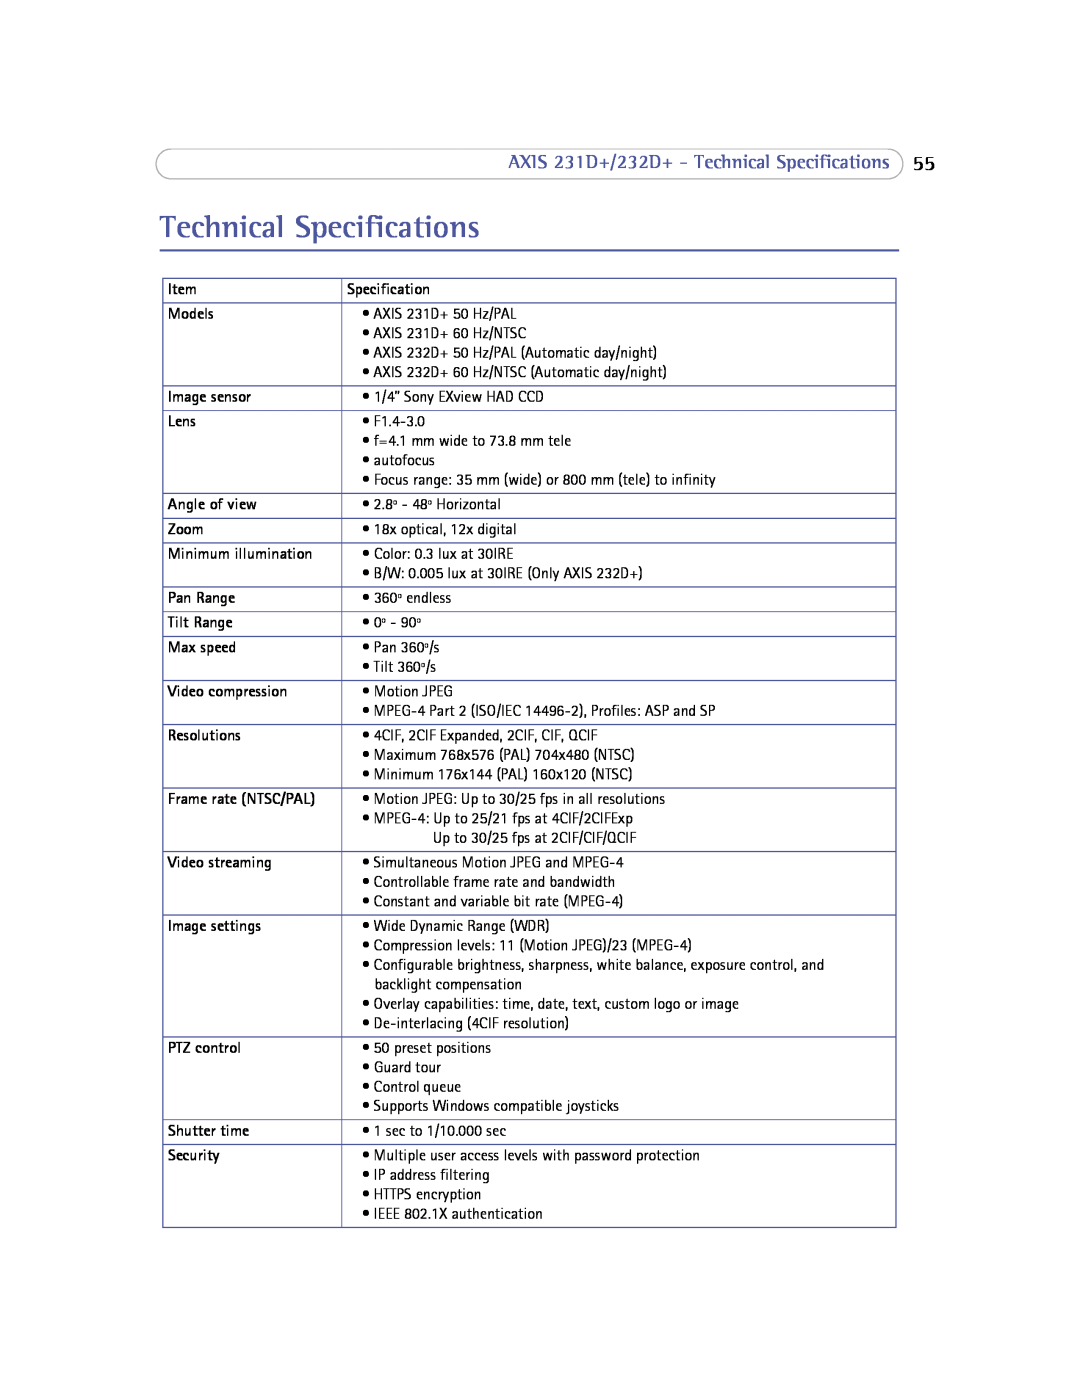 Axis Communications 232d+ user manual AXIS 231D+/232D+ - Technical Specifications 